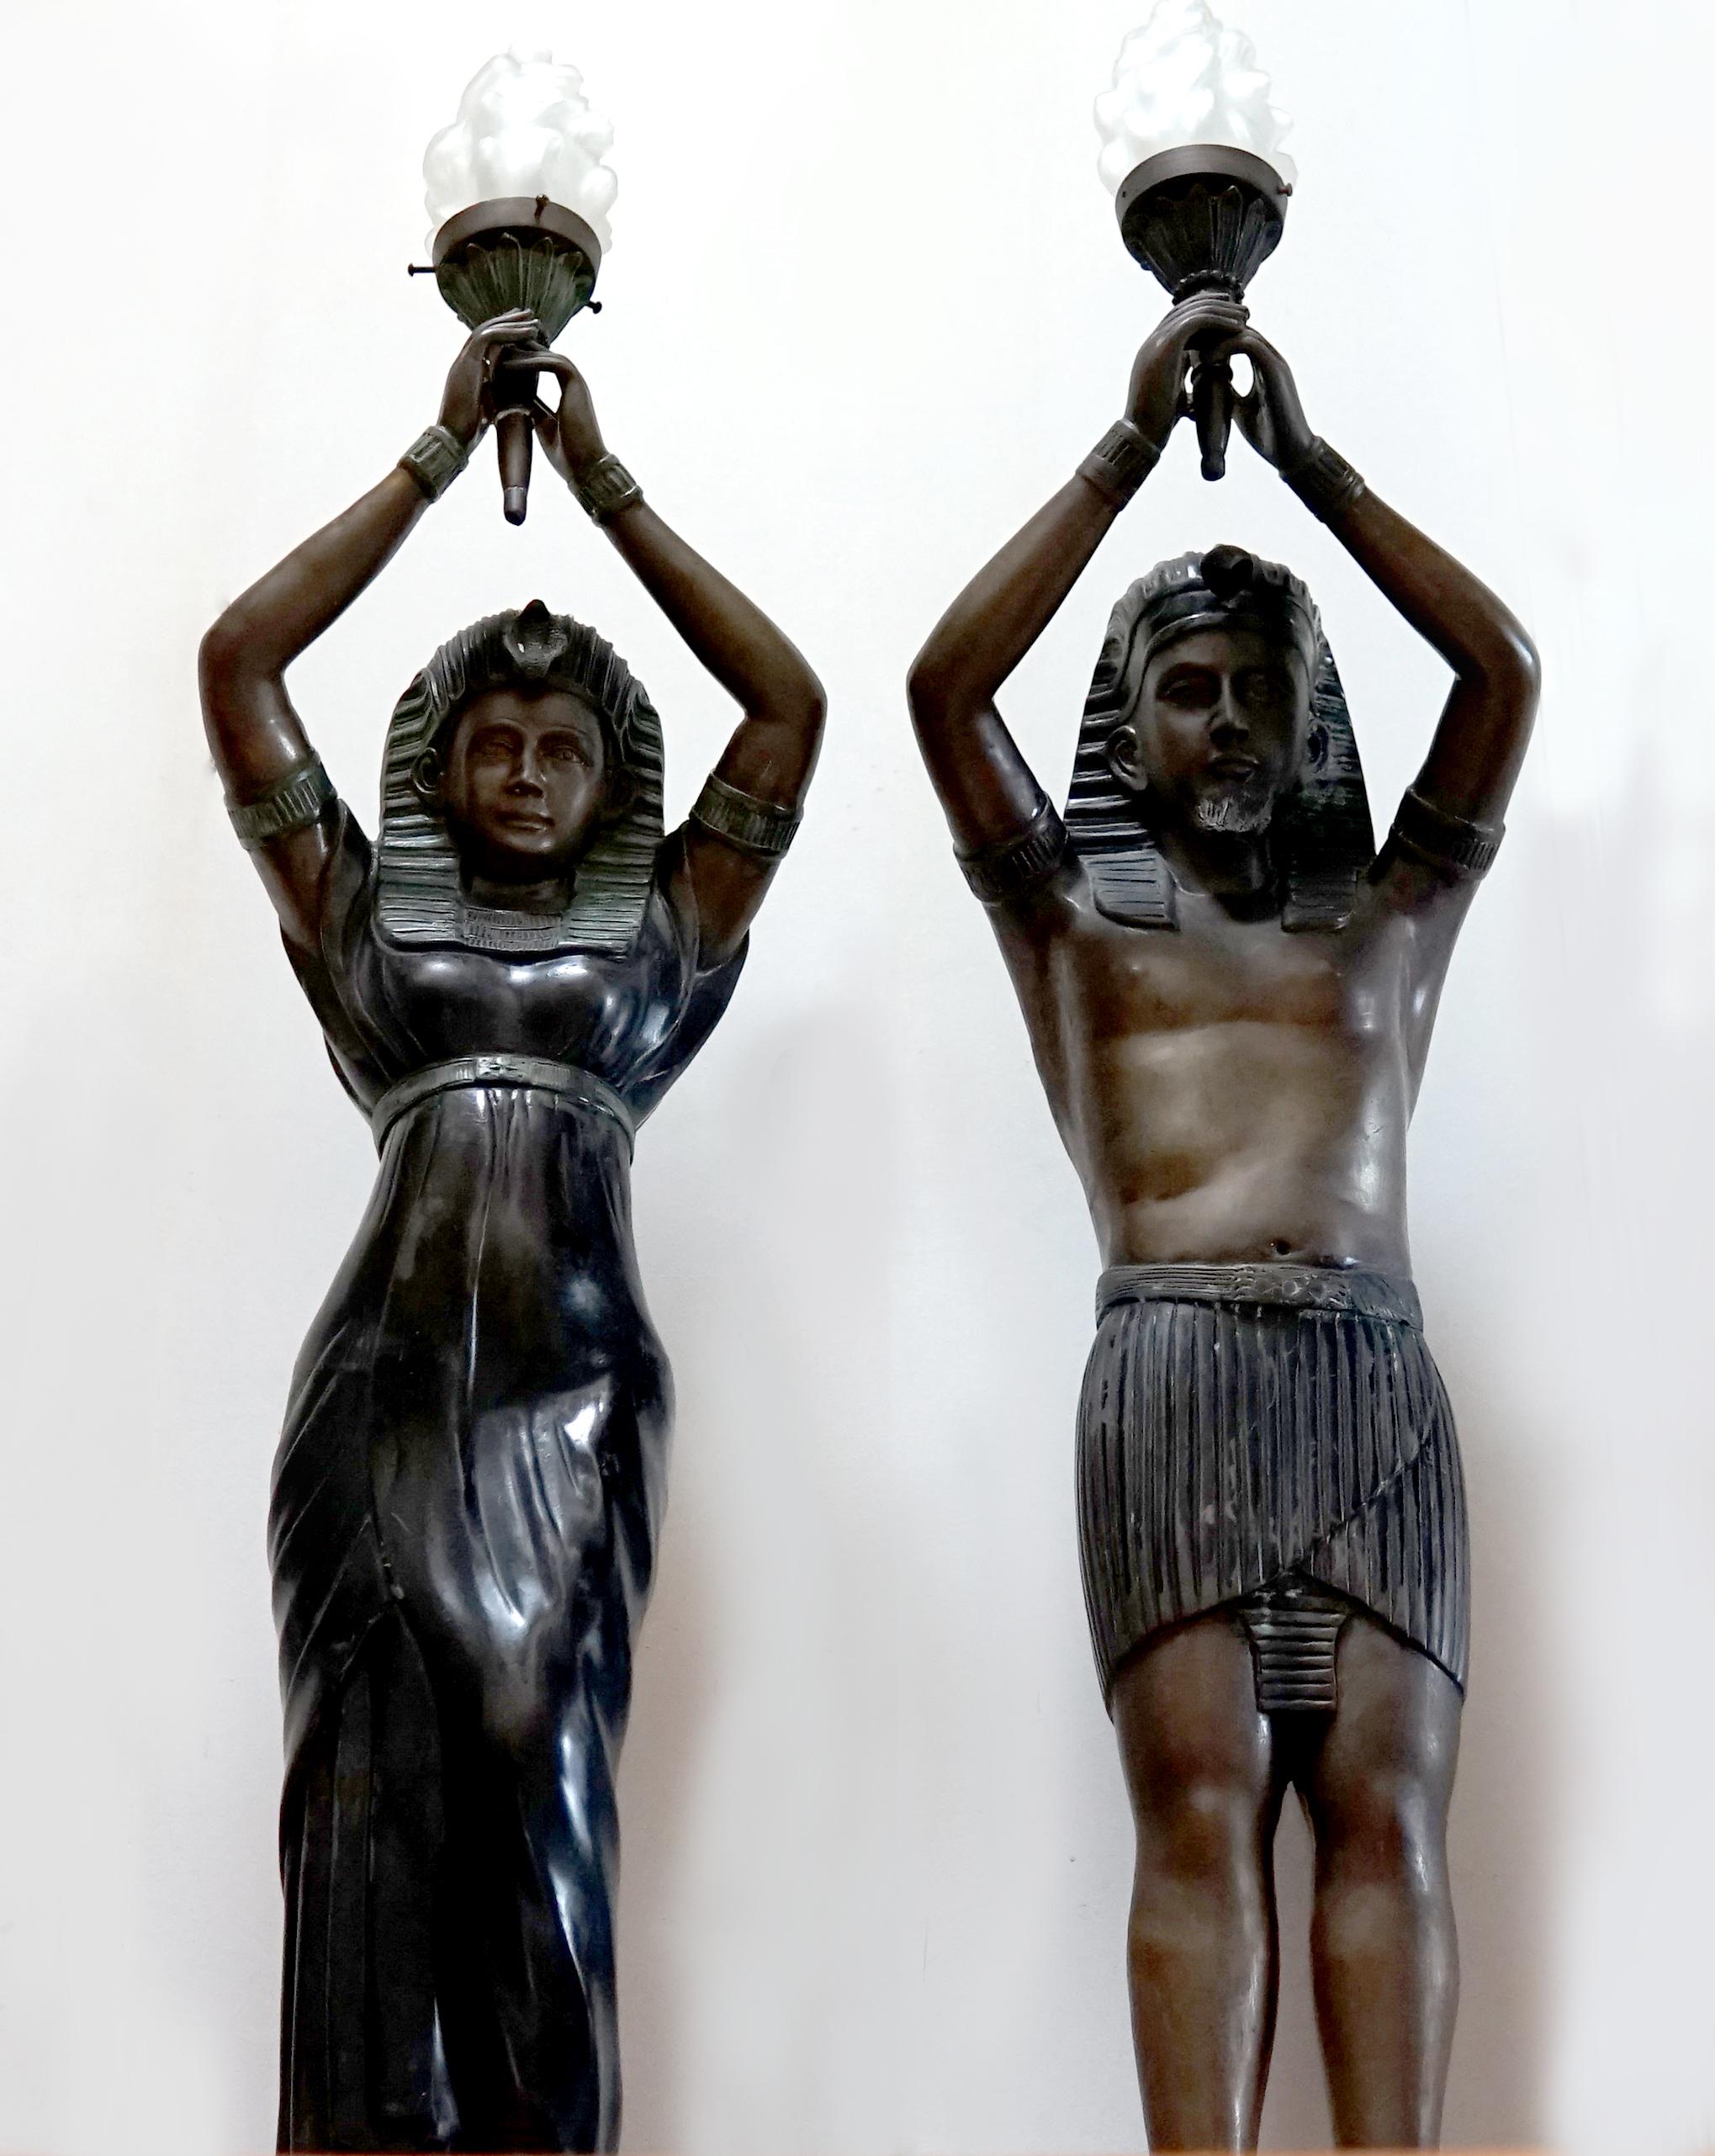 At the base of a staircase, or in front of a fireplace, the silhouettes of this pair has a lifelike quality. Pharaohs light the way from atop their geometric base. The bronze Egyptian-style statues will dominate the entryway and the conversation.